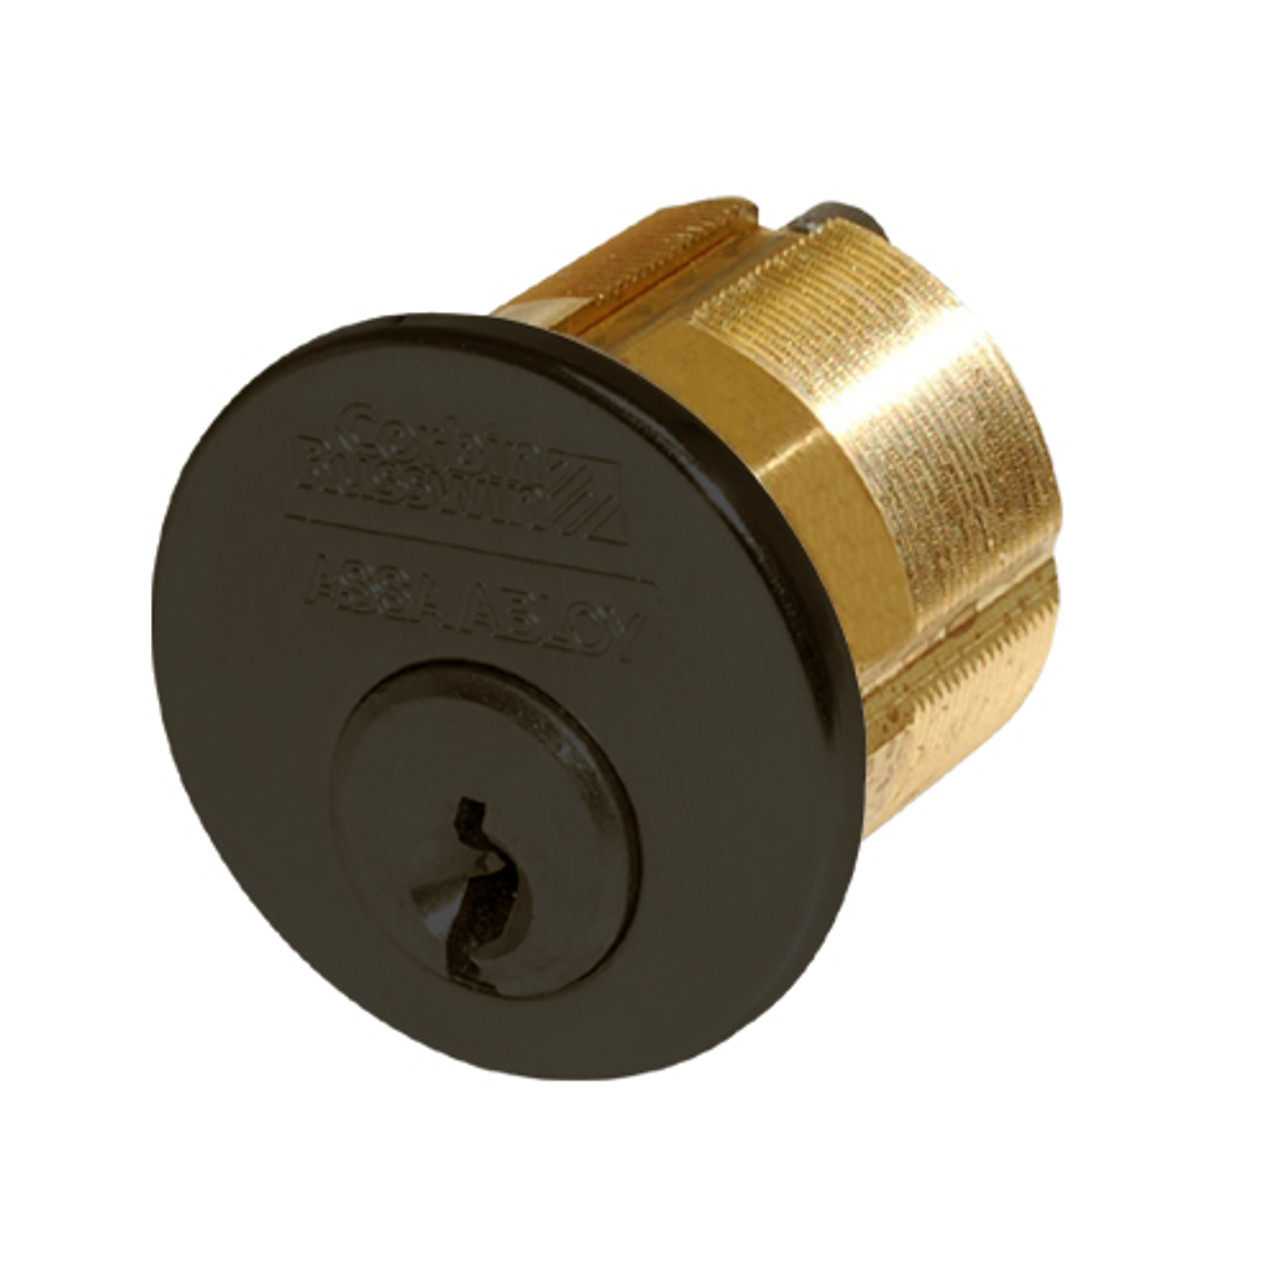 CR1000-138-A02-6-H4-613 Corbin Conventional Mortise Cylinder for Mortise Lock and DL3000 Deadlocks with Straight Cam in Oil Rubbed Bronze Finish